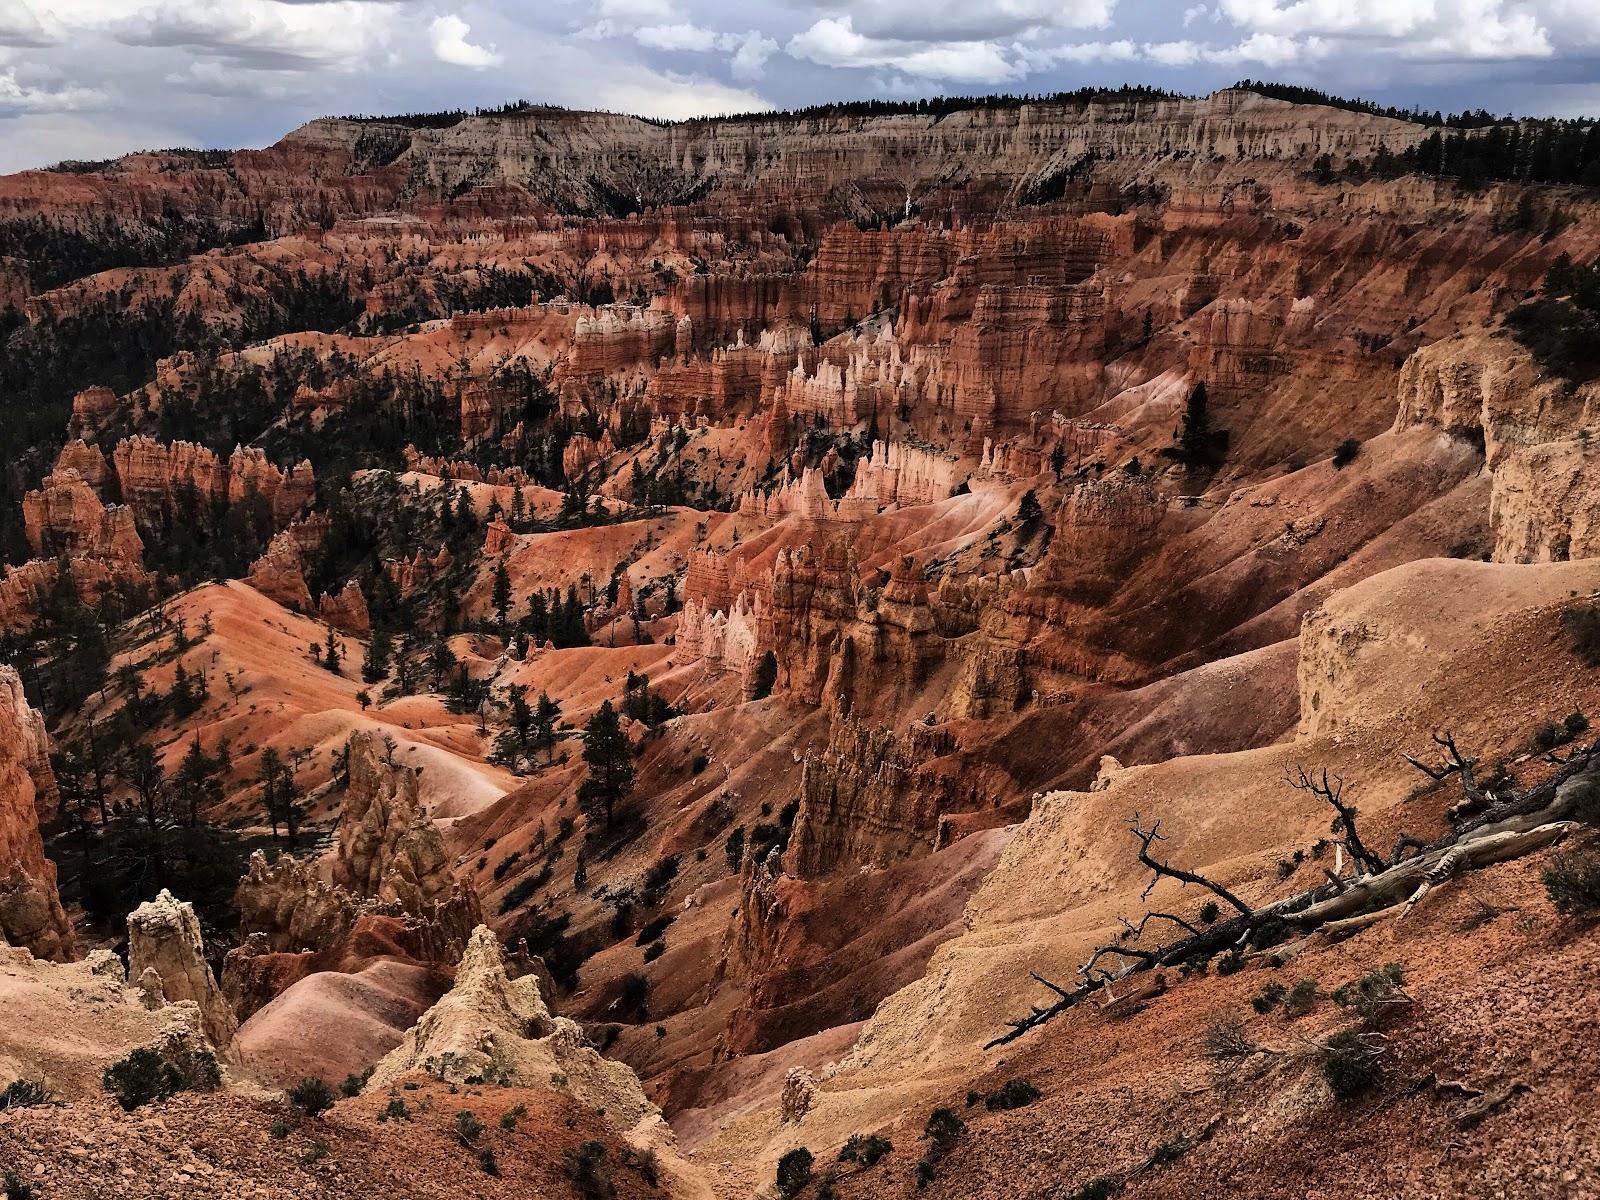 Bryce Canyon National Park Is Now Closed. KUER 90.1